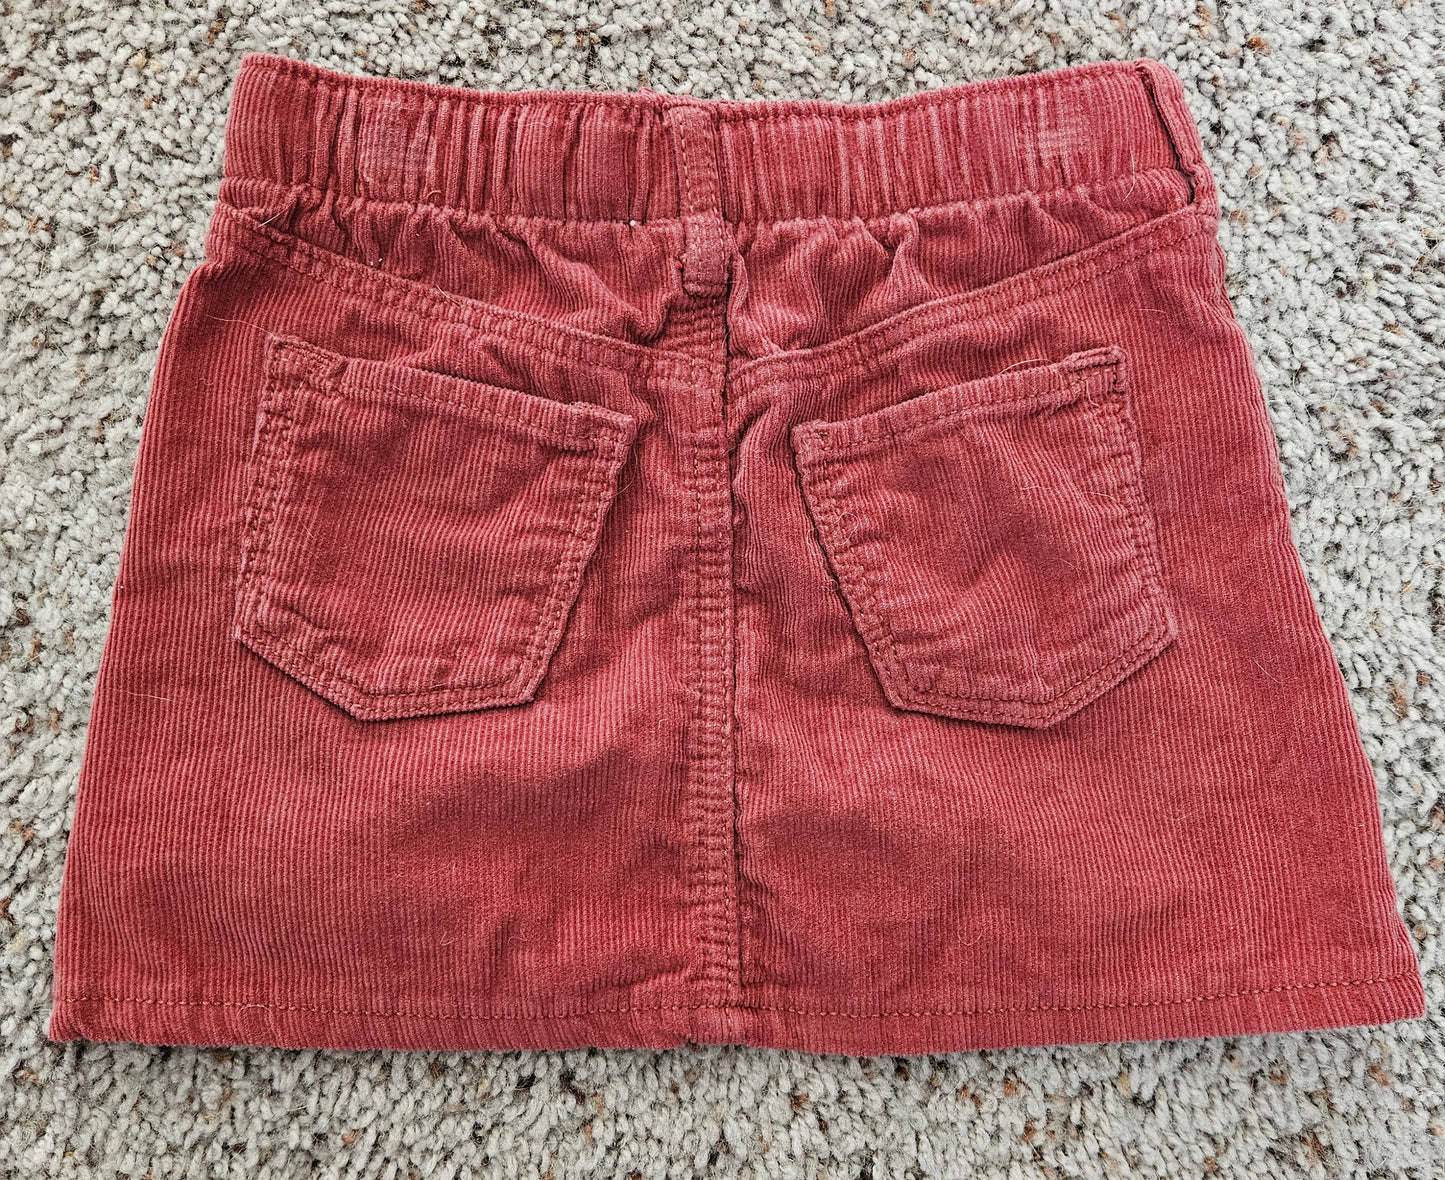 2T Old Navy red skirt